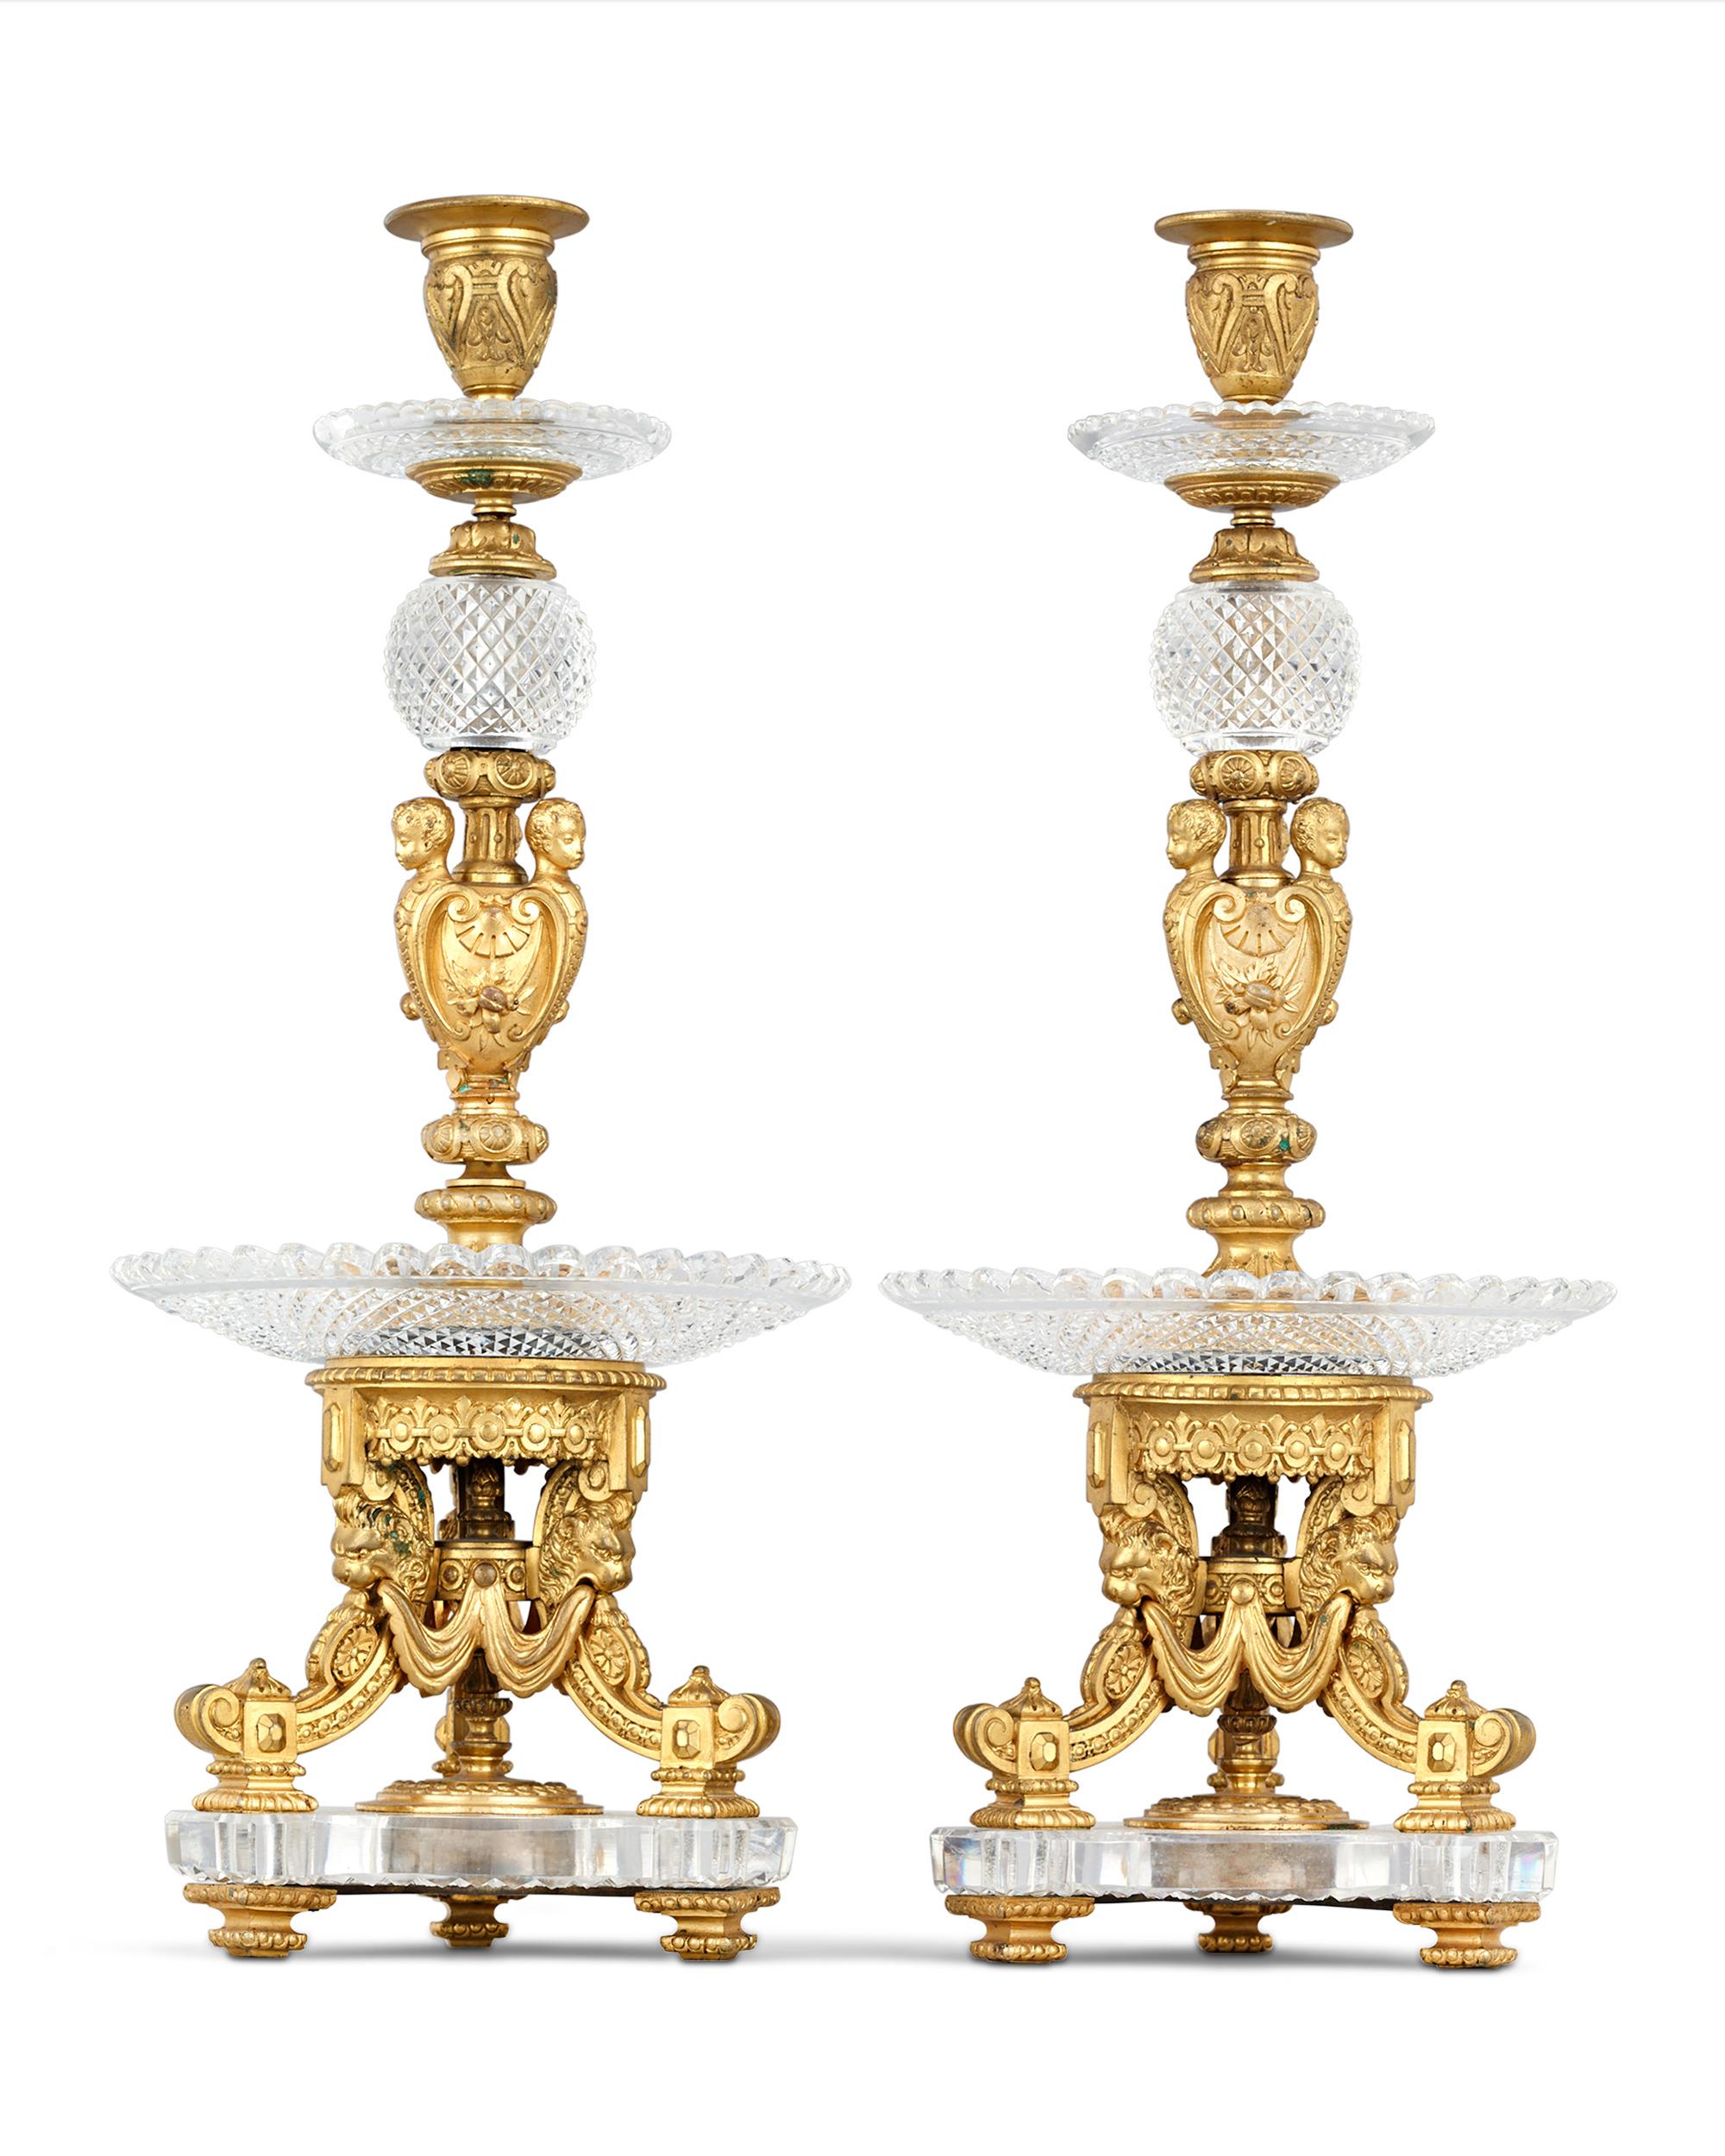 Neoclassical Ormolu and Cut Glass Table Garniture by Baccarat